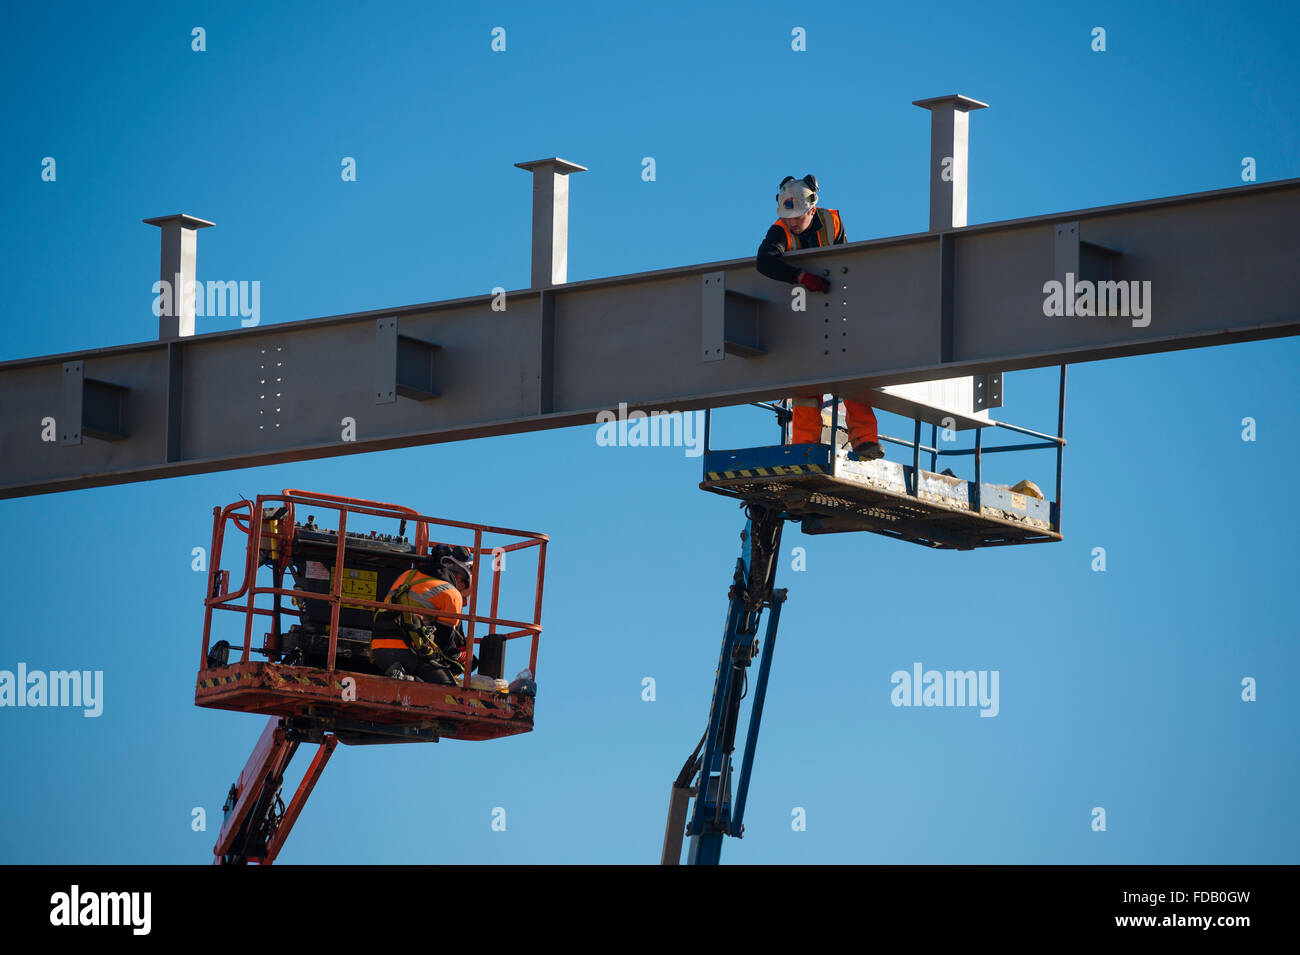 Men working at height from 'cherry picker' elevated platforms - erecting bolting together the steel frame of a new building that will house a branch of Tesco supermarket and Marks & Spencer store,  on a clear blue sky day, Aberystwyth Wales UK Stock Photo